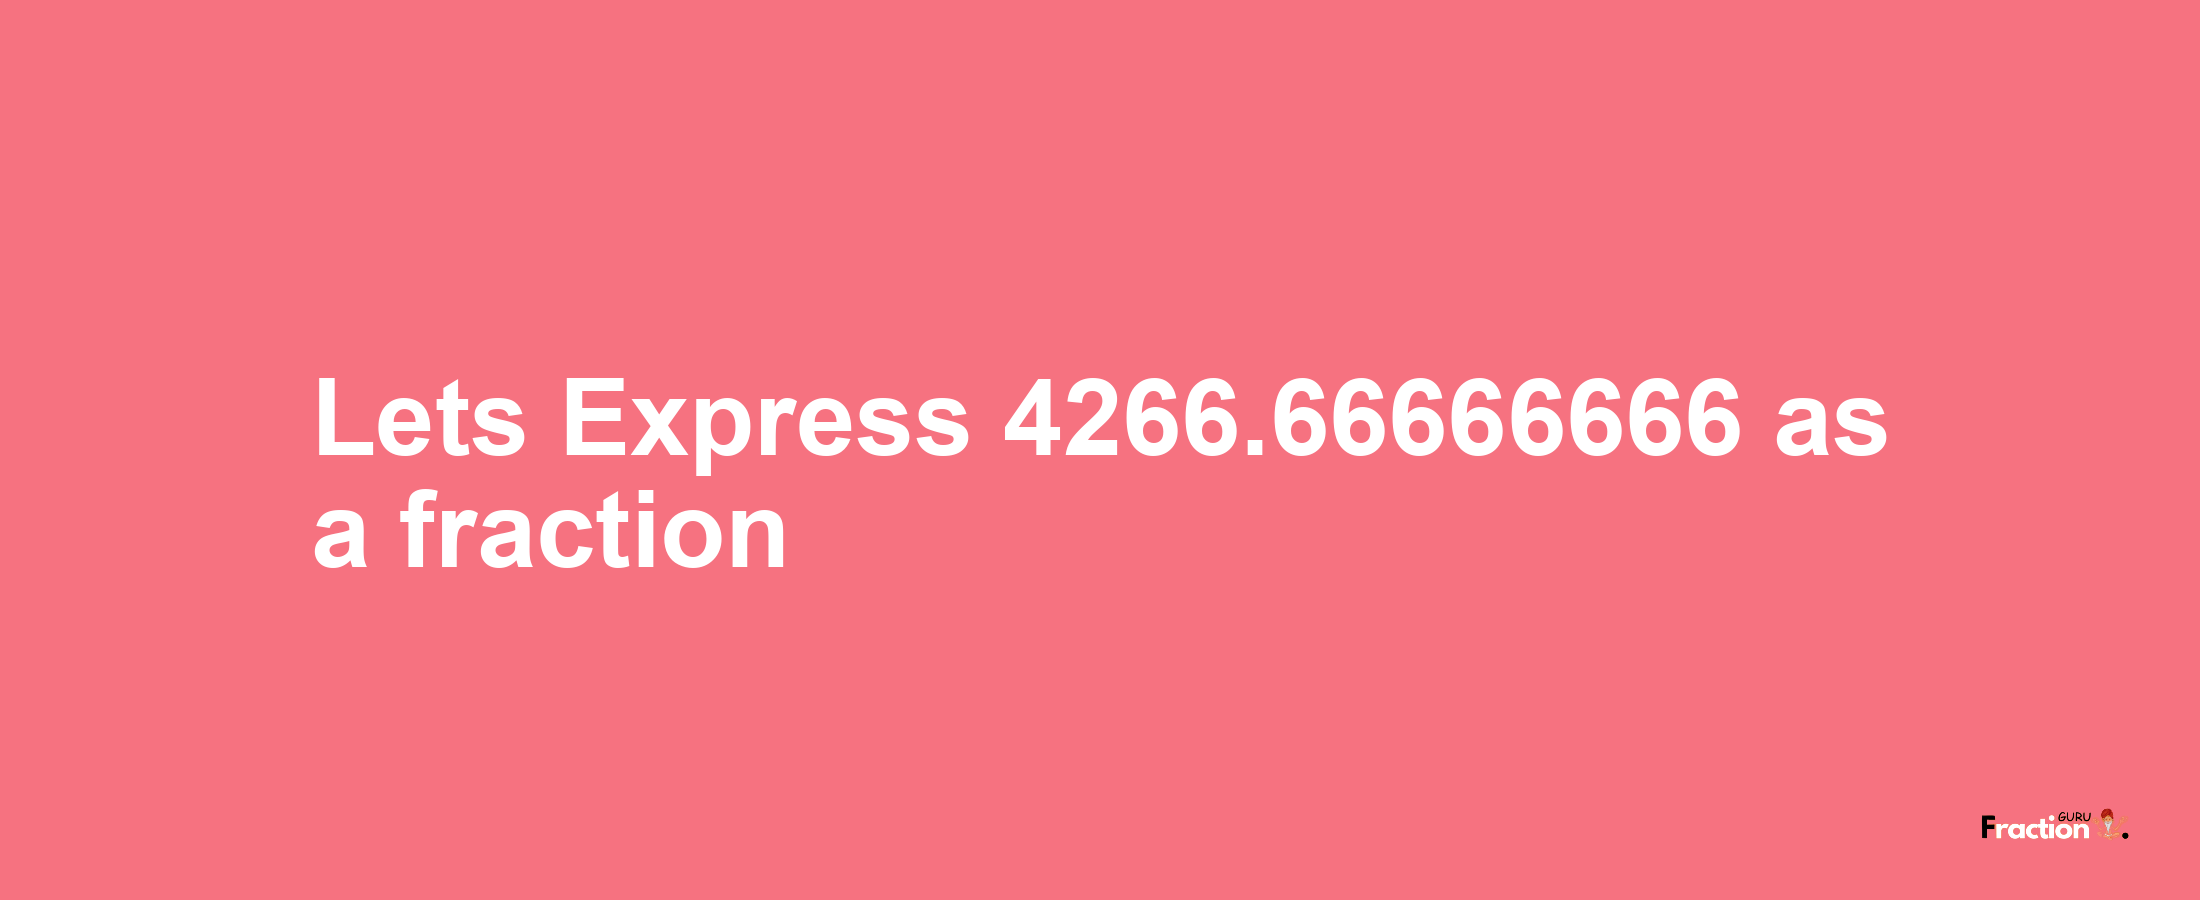 Lets Express 4266.66666666 as afraction